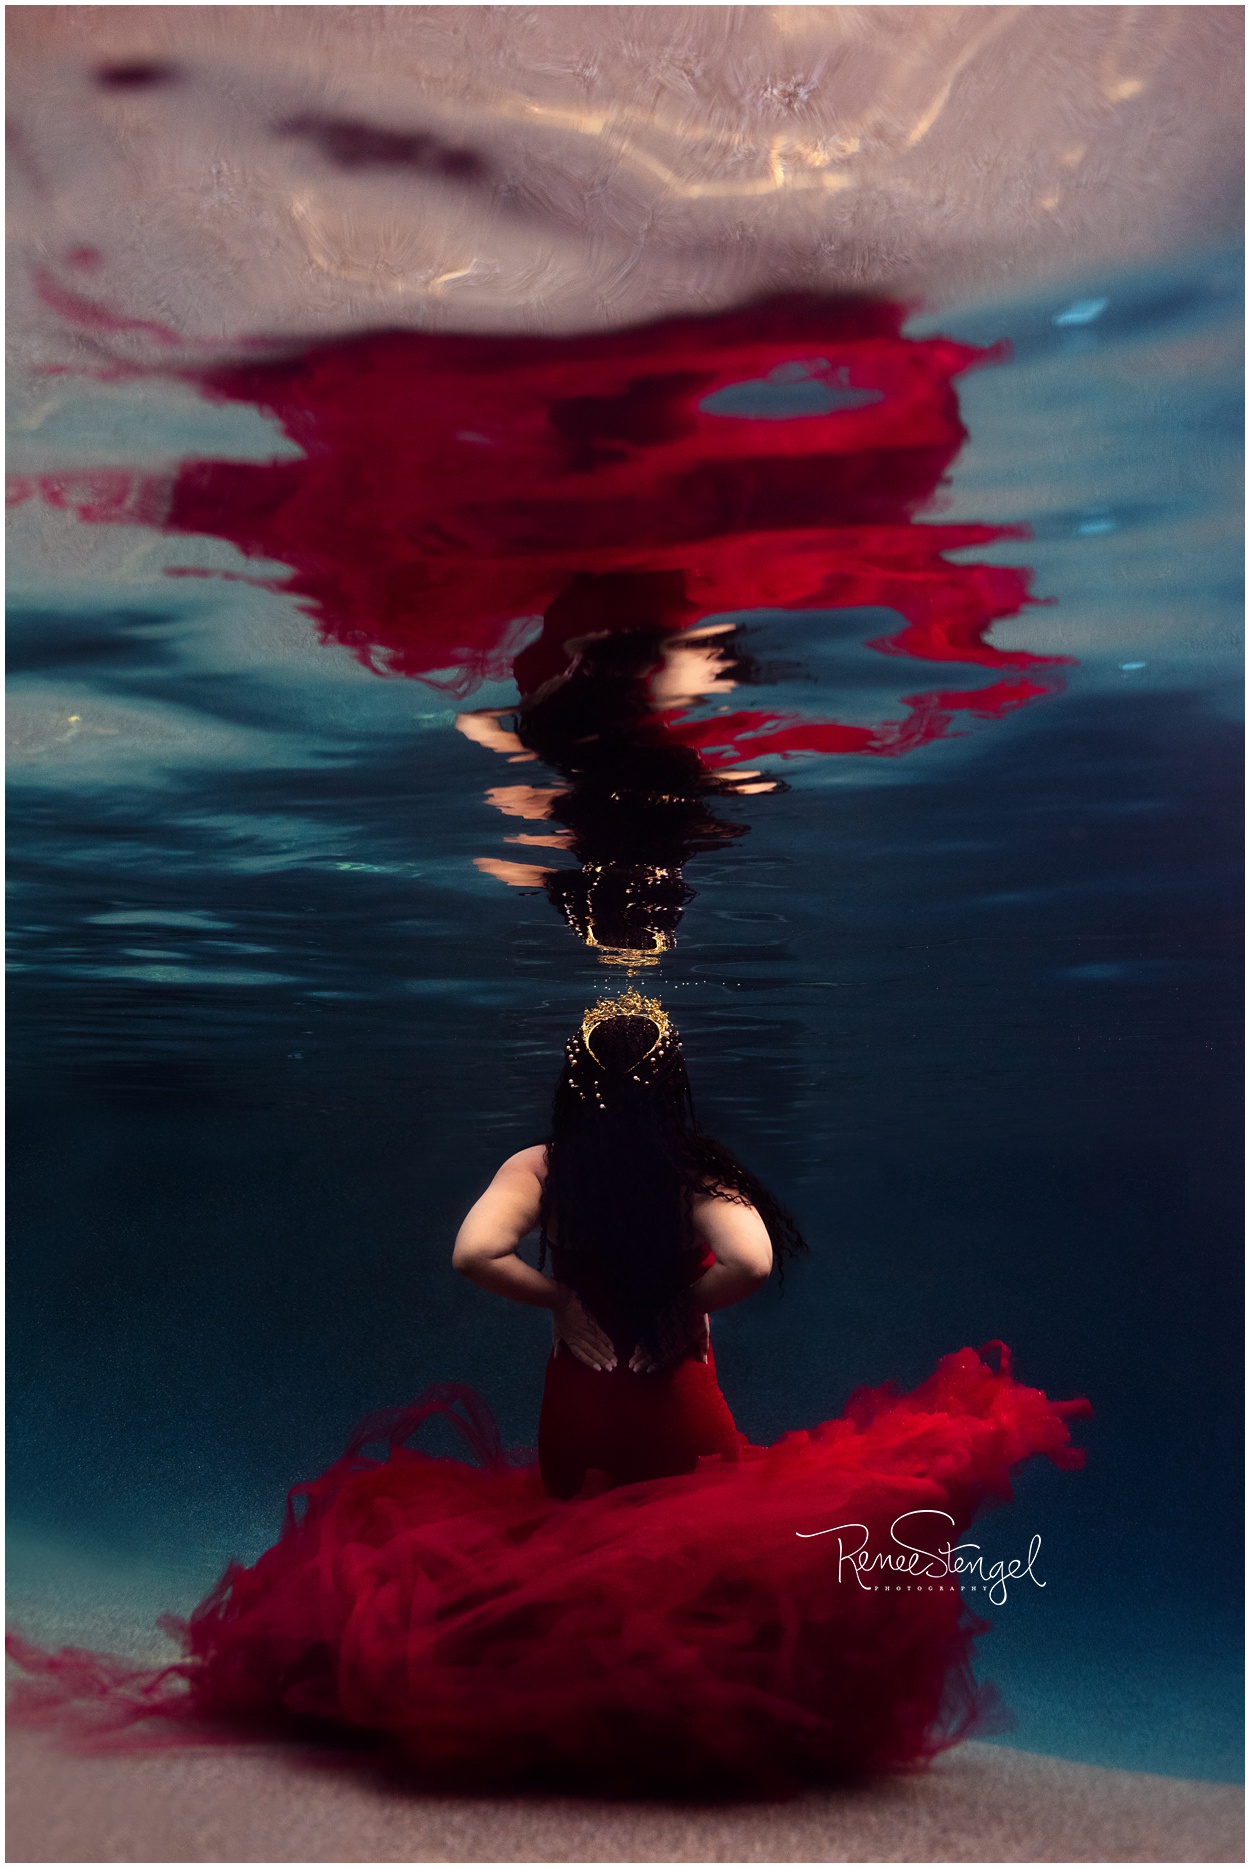 Underwater Maternity in Dramatic Sew Whimsey Tulle and Lace Red Gown with Pearl Hairpins and Gold Crown on braided black hair